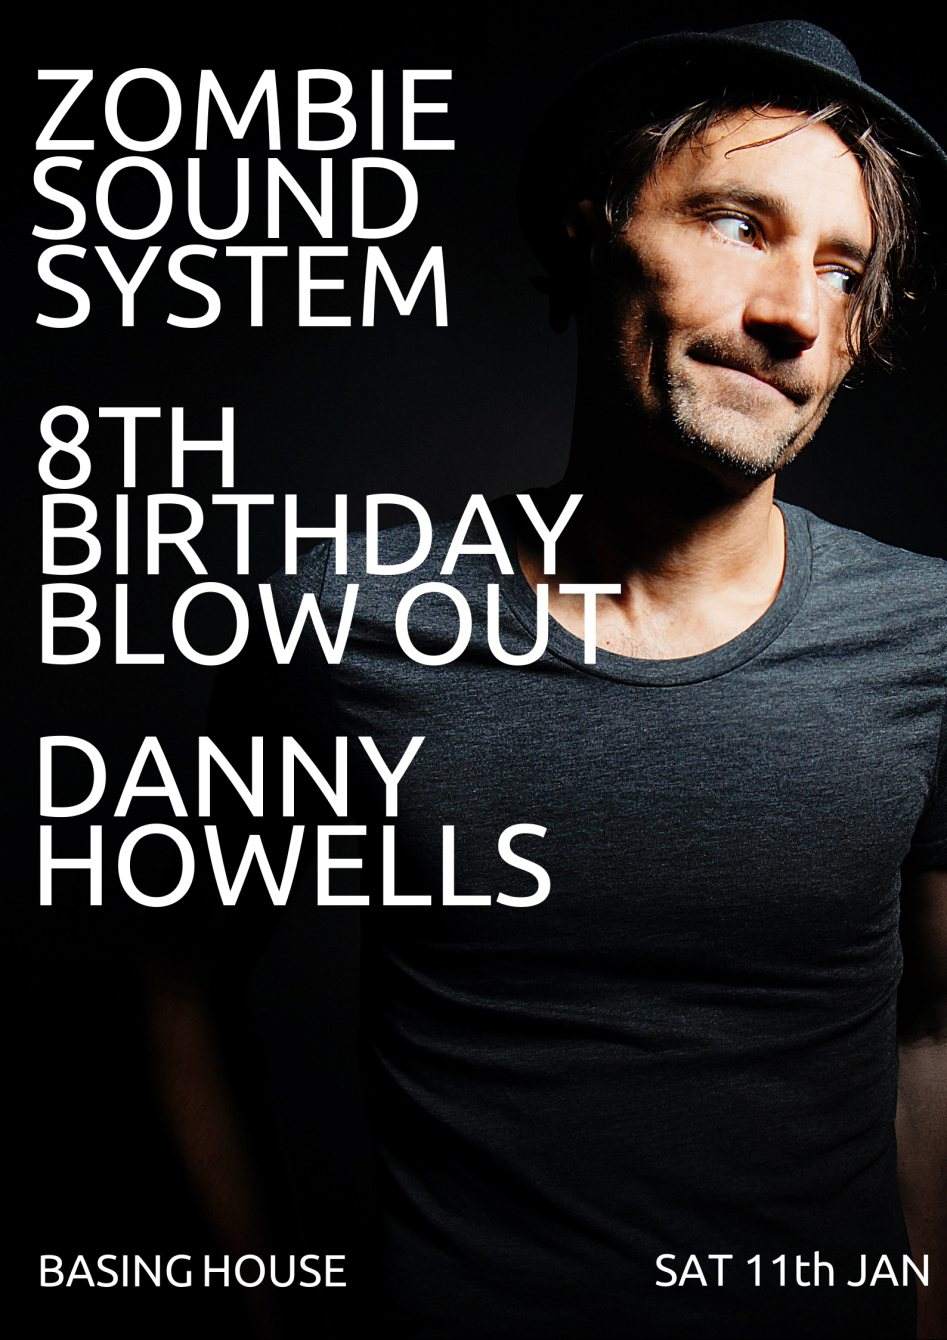 Zombie Soundsystem's 8th Birthday Blow out - フライヤー表